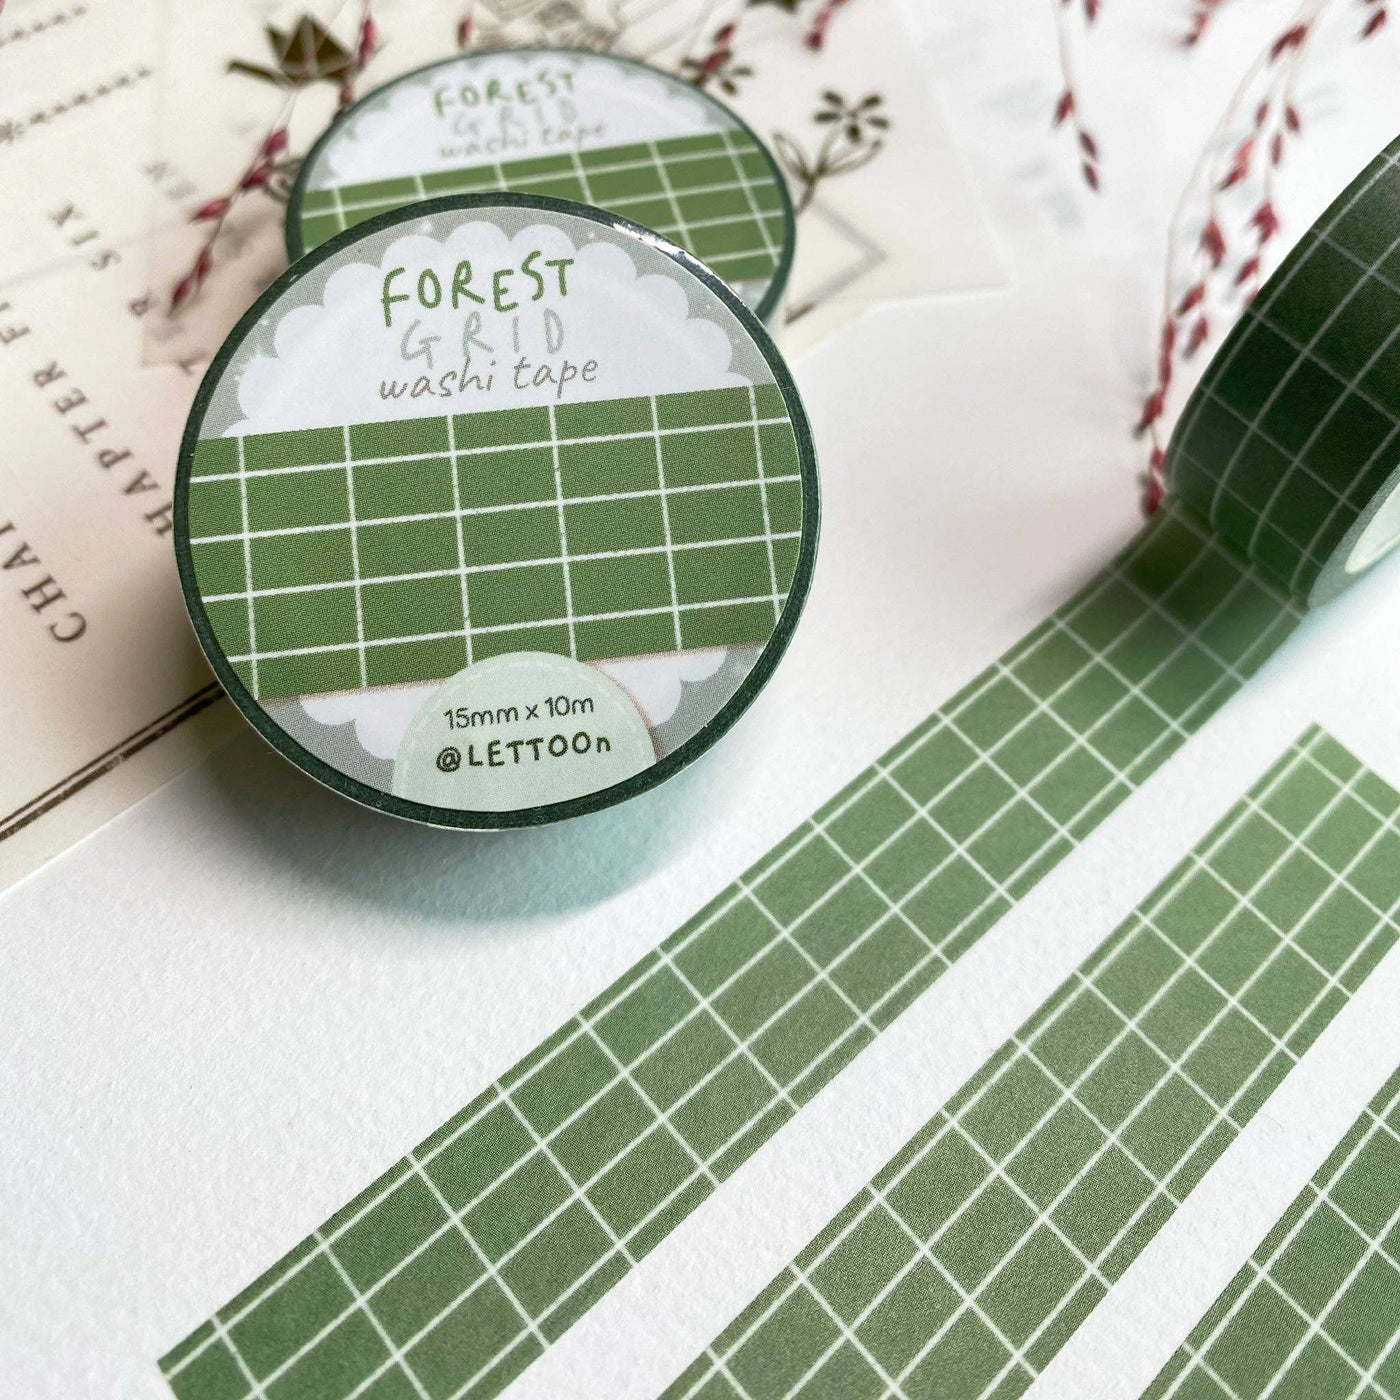 Forest Grid | Washi Tape